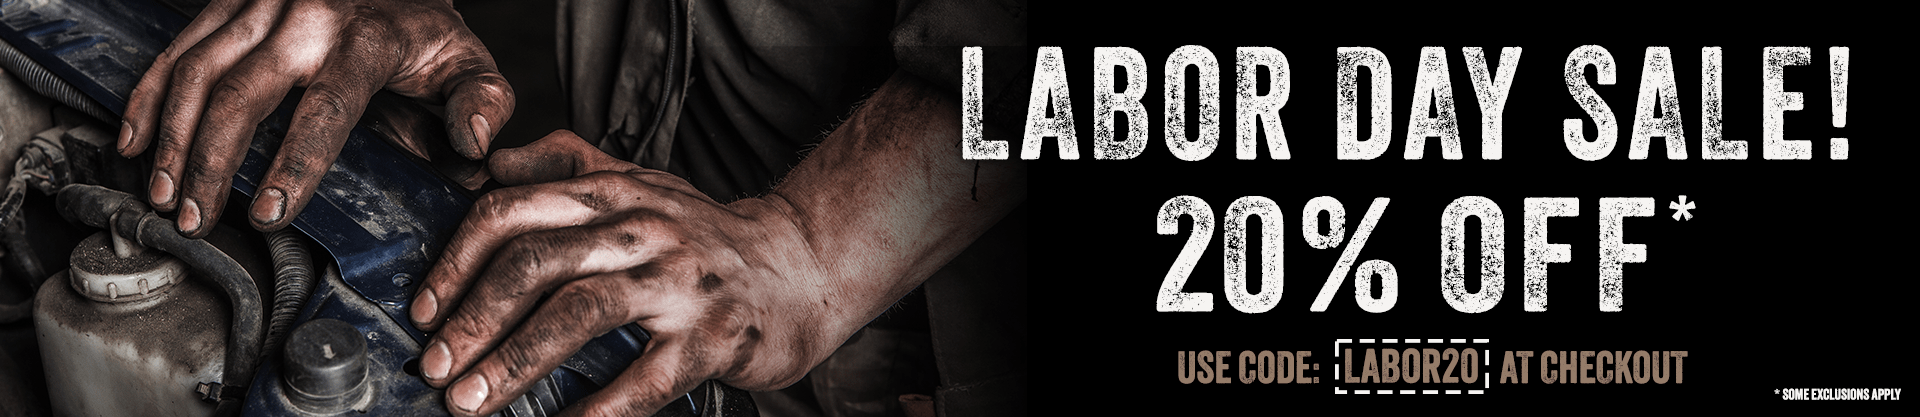 Celebrate Labor Day 2023 with 20% Off at Colemams.com! Use Code LABOR20